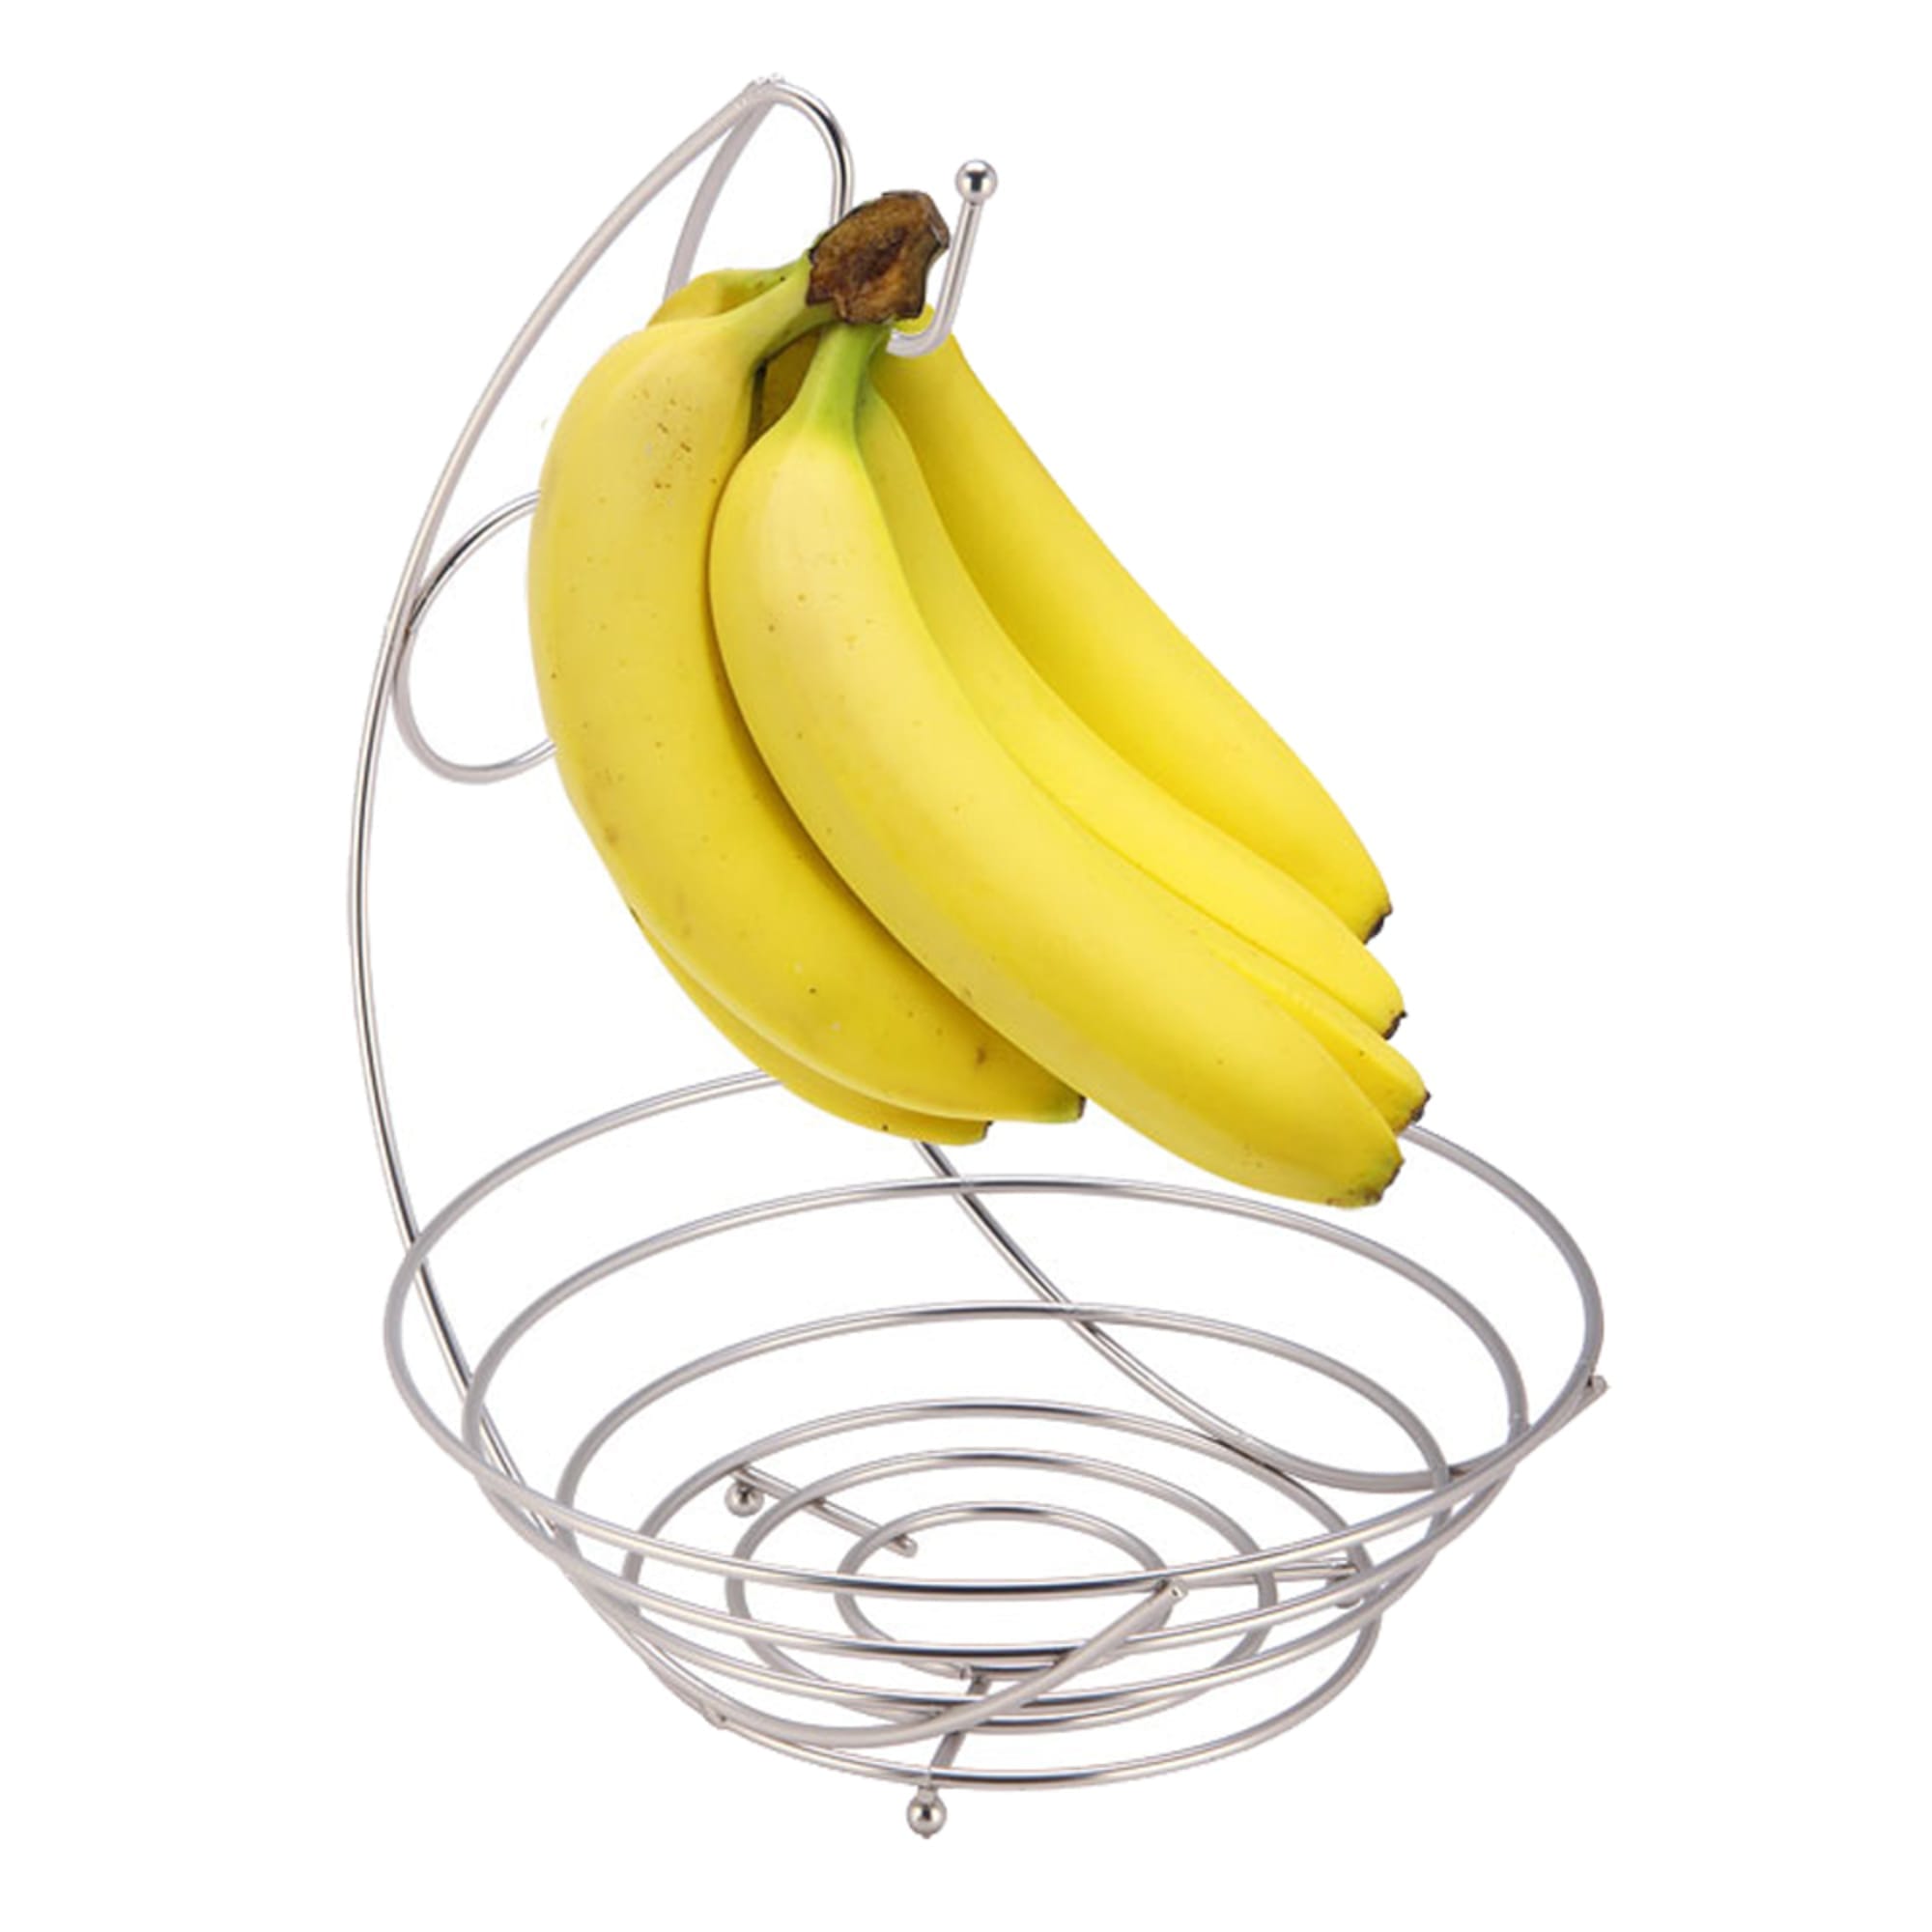 Home Basics Satin Nickel Fruit Bowl with Banana Tree $10.00 EACH, CASE PACK OF 12